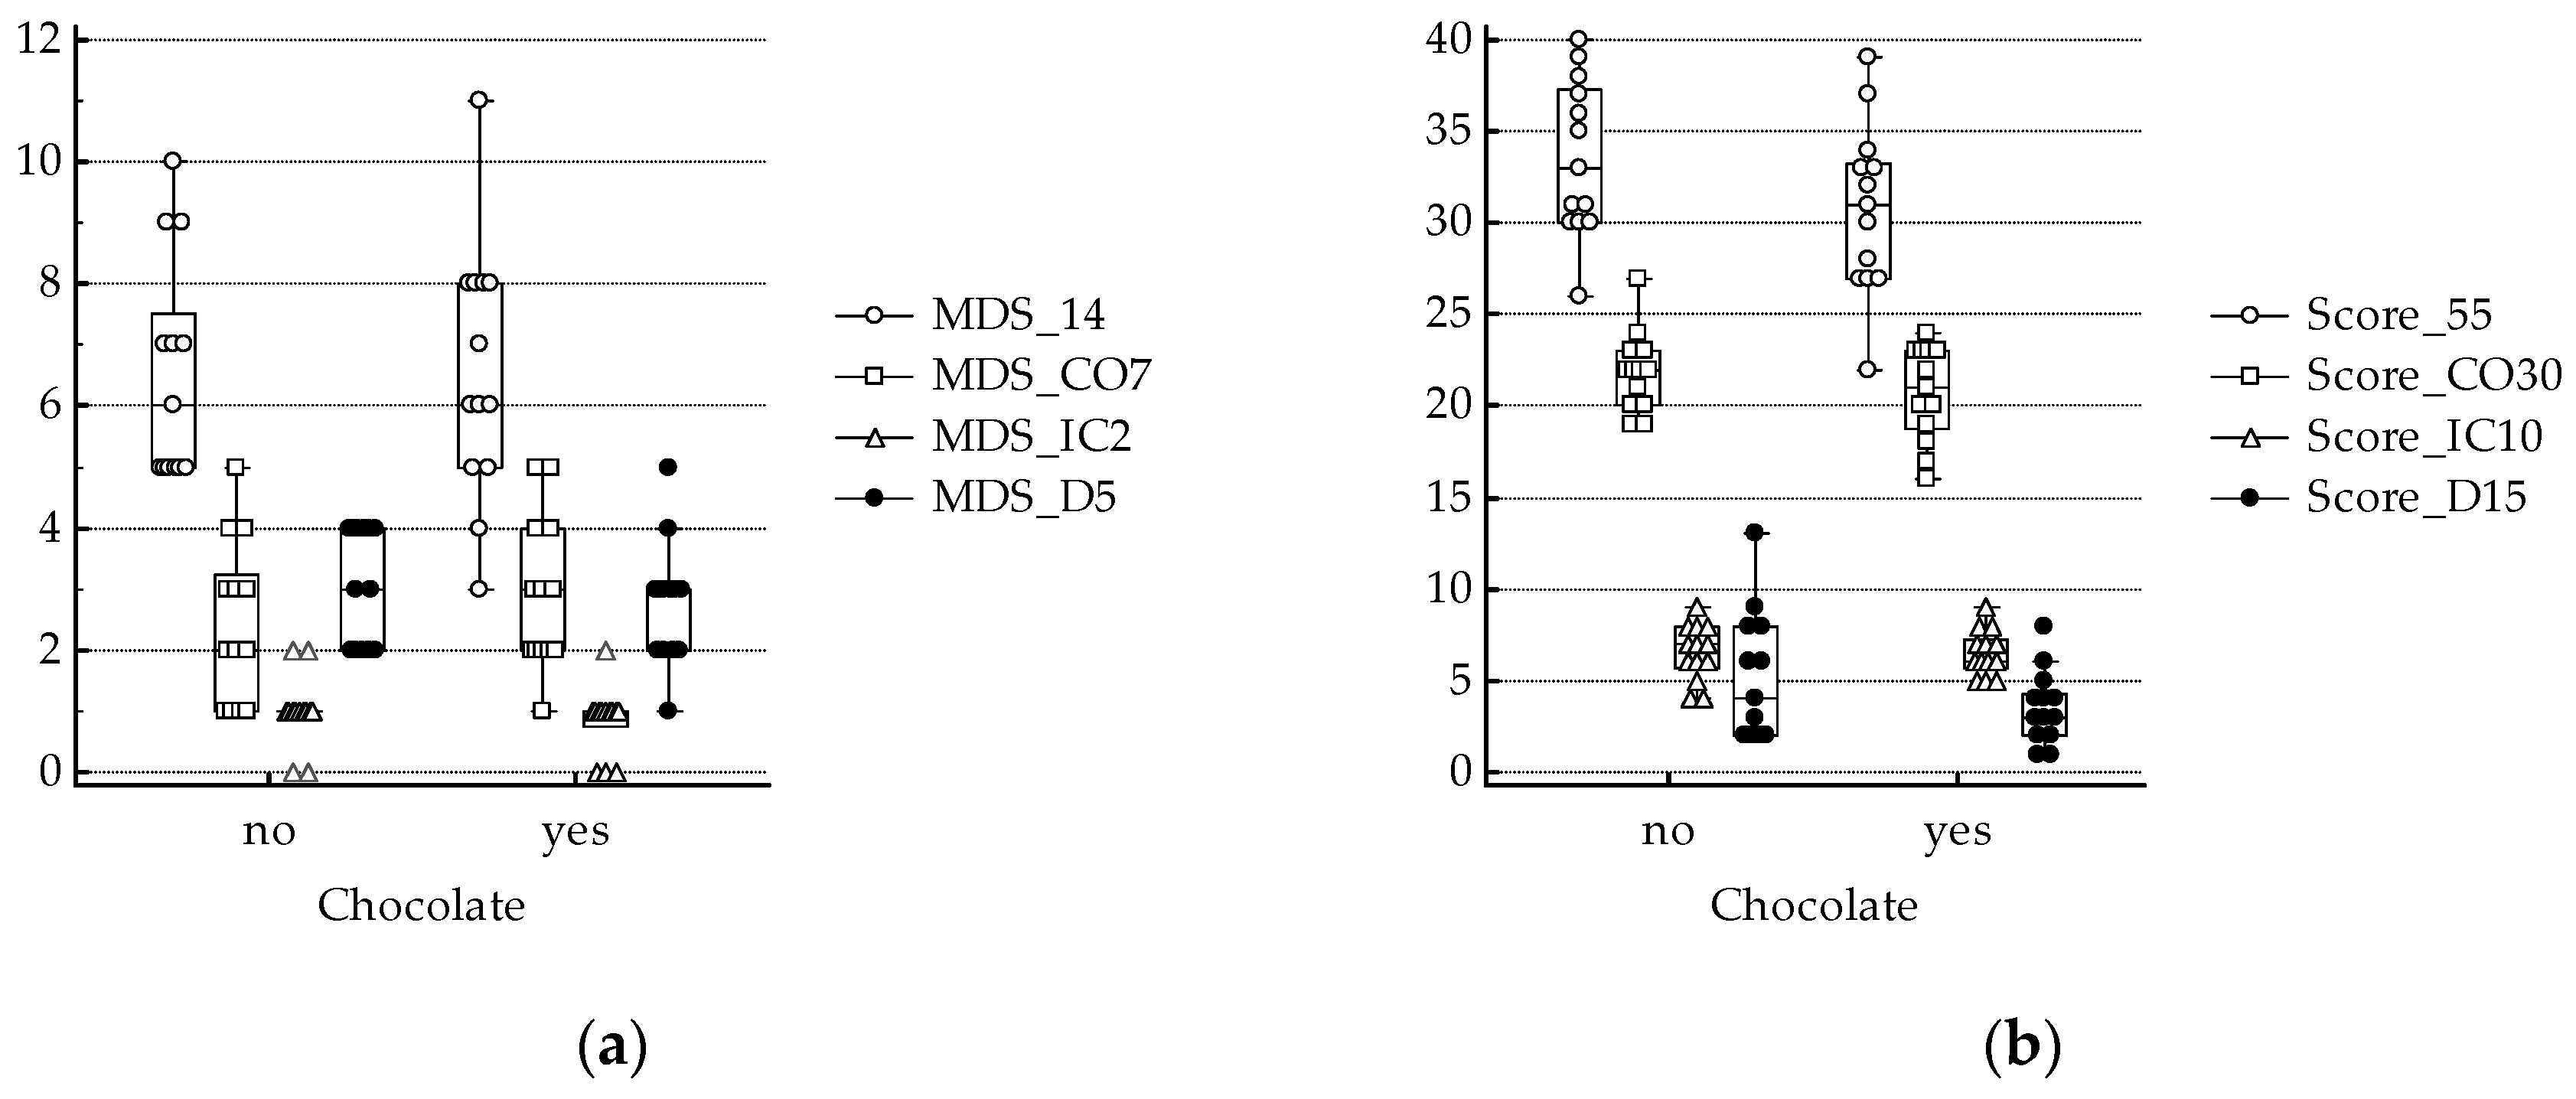 Antioxidants Free Full Text Chocolate Consumers And Lymphocyte To Monocyte Ratio A Working Hypothesis From A Preliminary Report Of A Pilot Study In Celiac Subjects Html